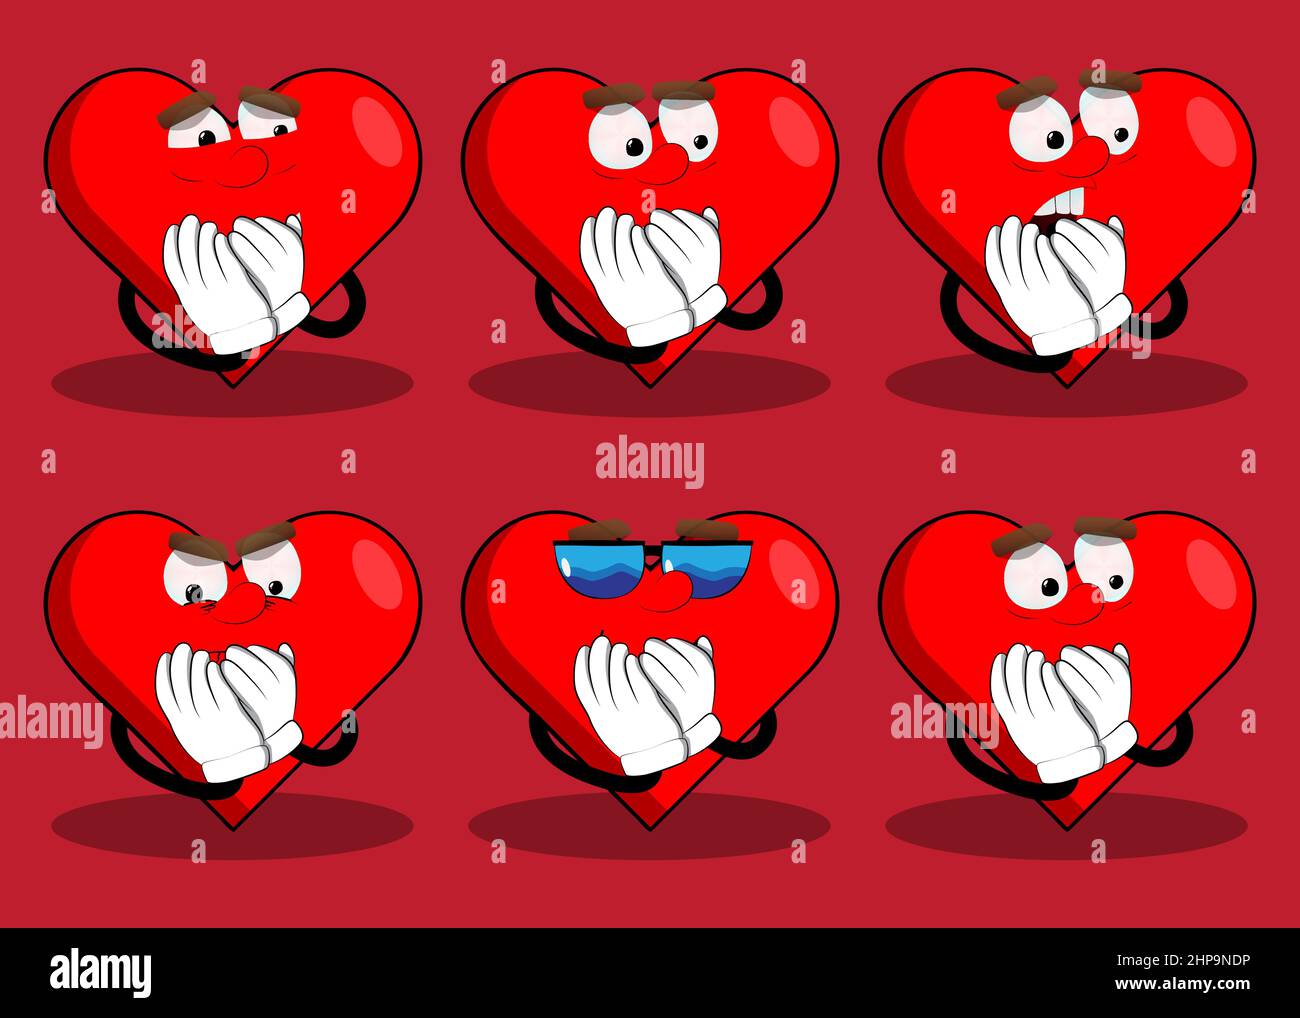 Heart Shape with hands over mouth as a cartoon character, funny red love holiday illustration. Stock Vector